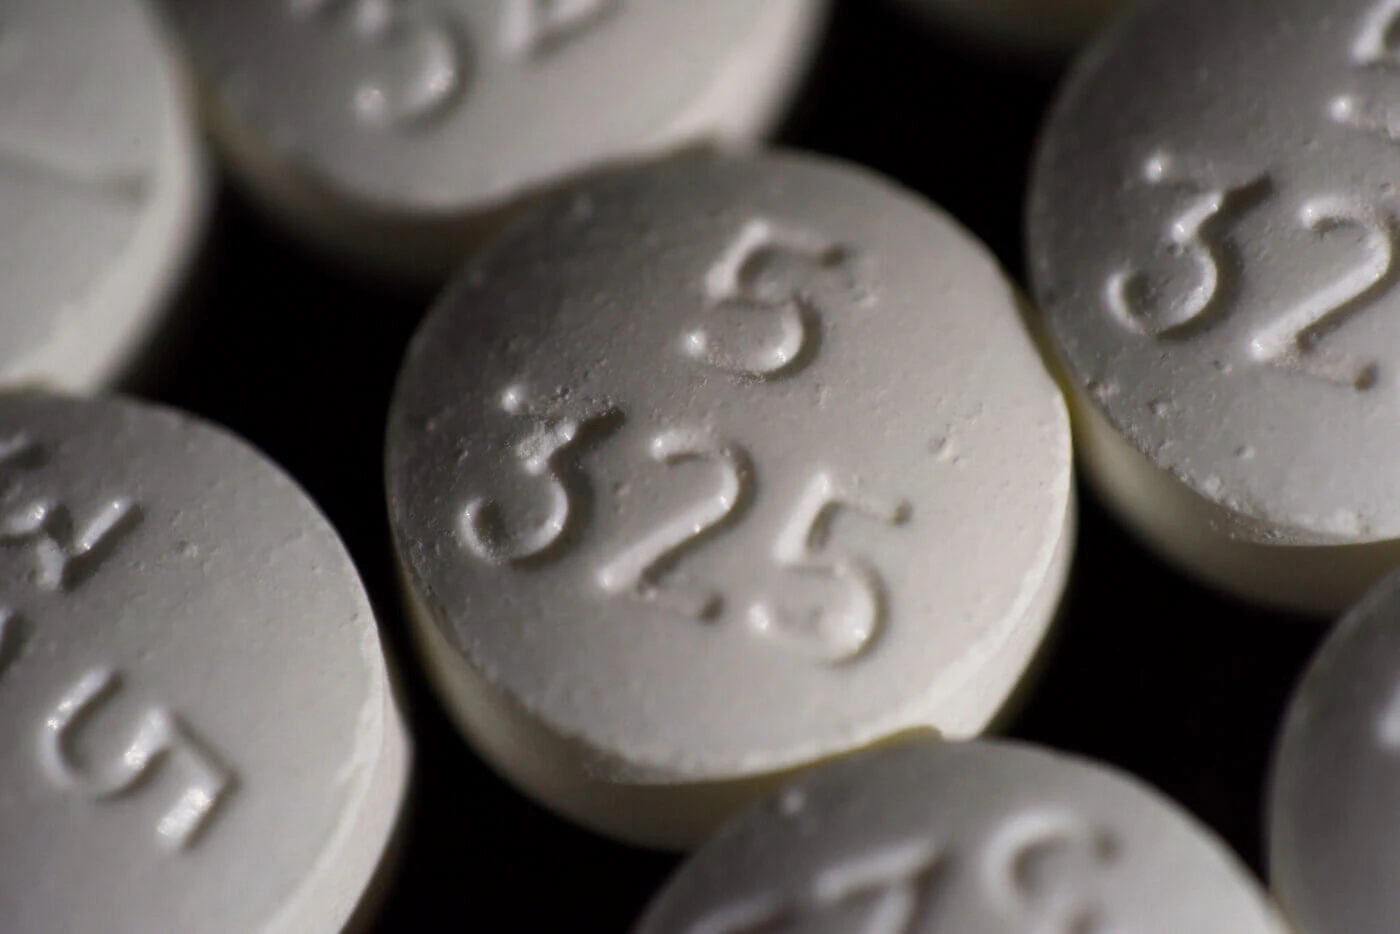 FILE - An arrangement of pills of the opioid oxycodone-acetaminophen in New York. Idaho officials on Friday, May 13, 2022, agreed to a $119 million settlement with drugmaker Johnson & Johnson and three major distributors over their role in the opioid addiction crisis. (AP Photo/Patrick Sison, File)